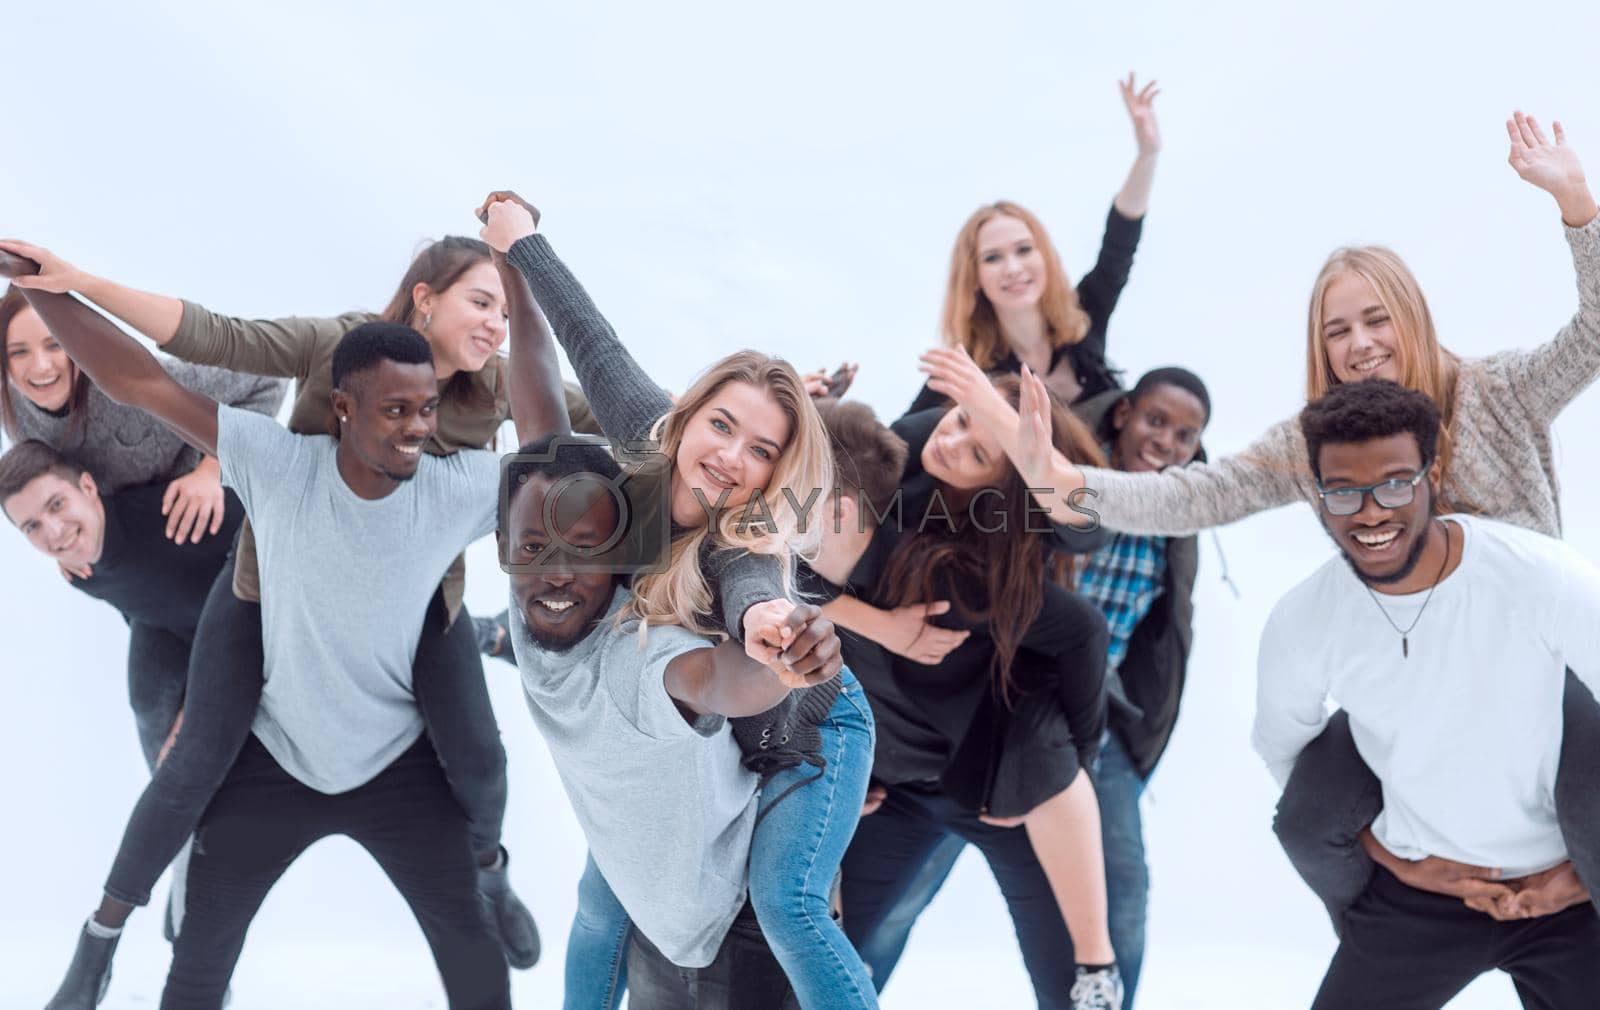 group of diverse fun-loving young people standing together . isolated on a white